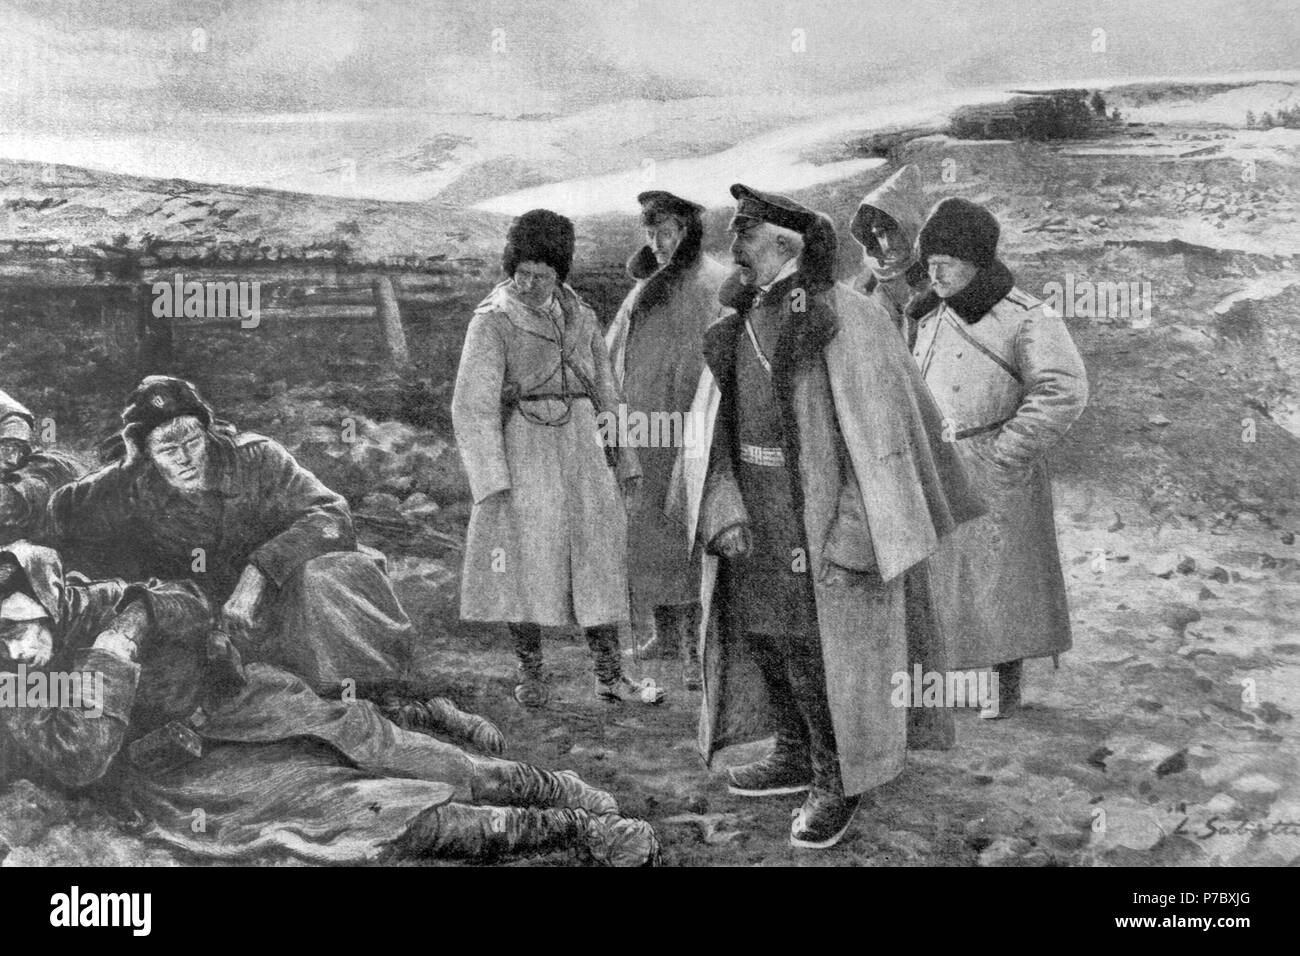 Russo-Japanese War (1904-1905). Last days of Port Arthur resistance. The Russian General Anatoly Stessel (1848-1915) visits the survivors of a combat of five days and five nights. Engraving by L. Sabattier.  'La Ilustracio n Artistica', 1905. Stock Photo